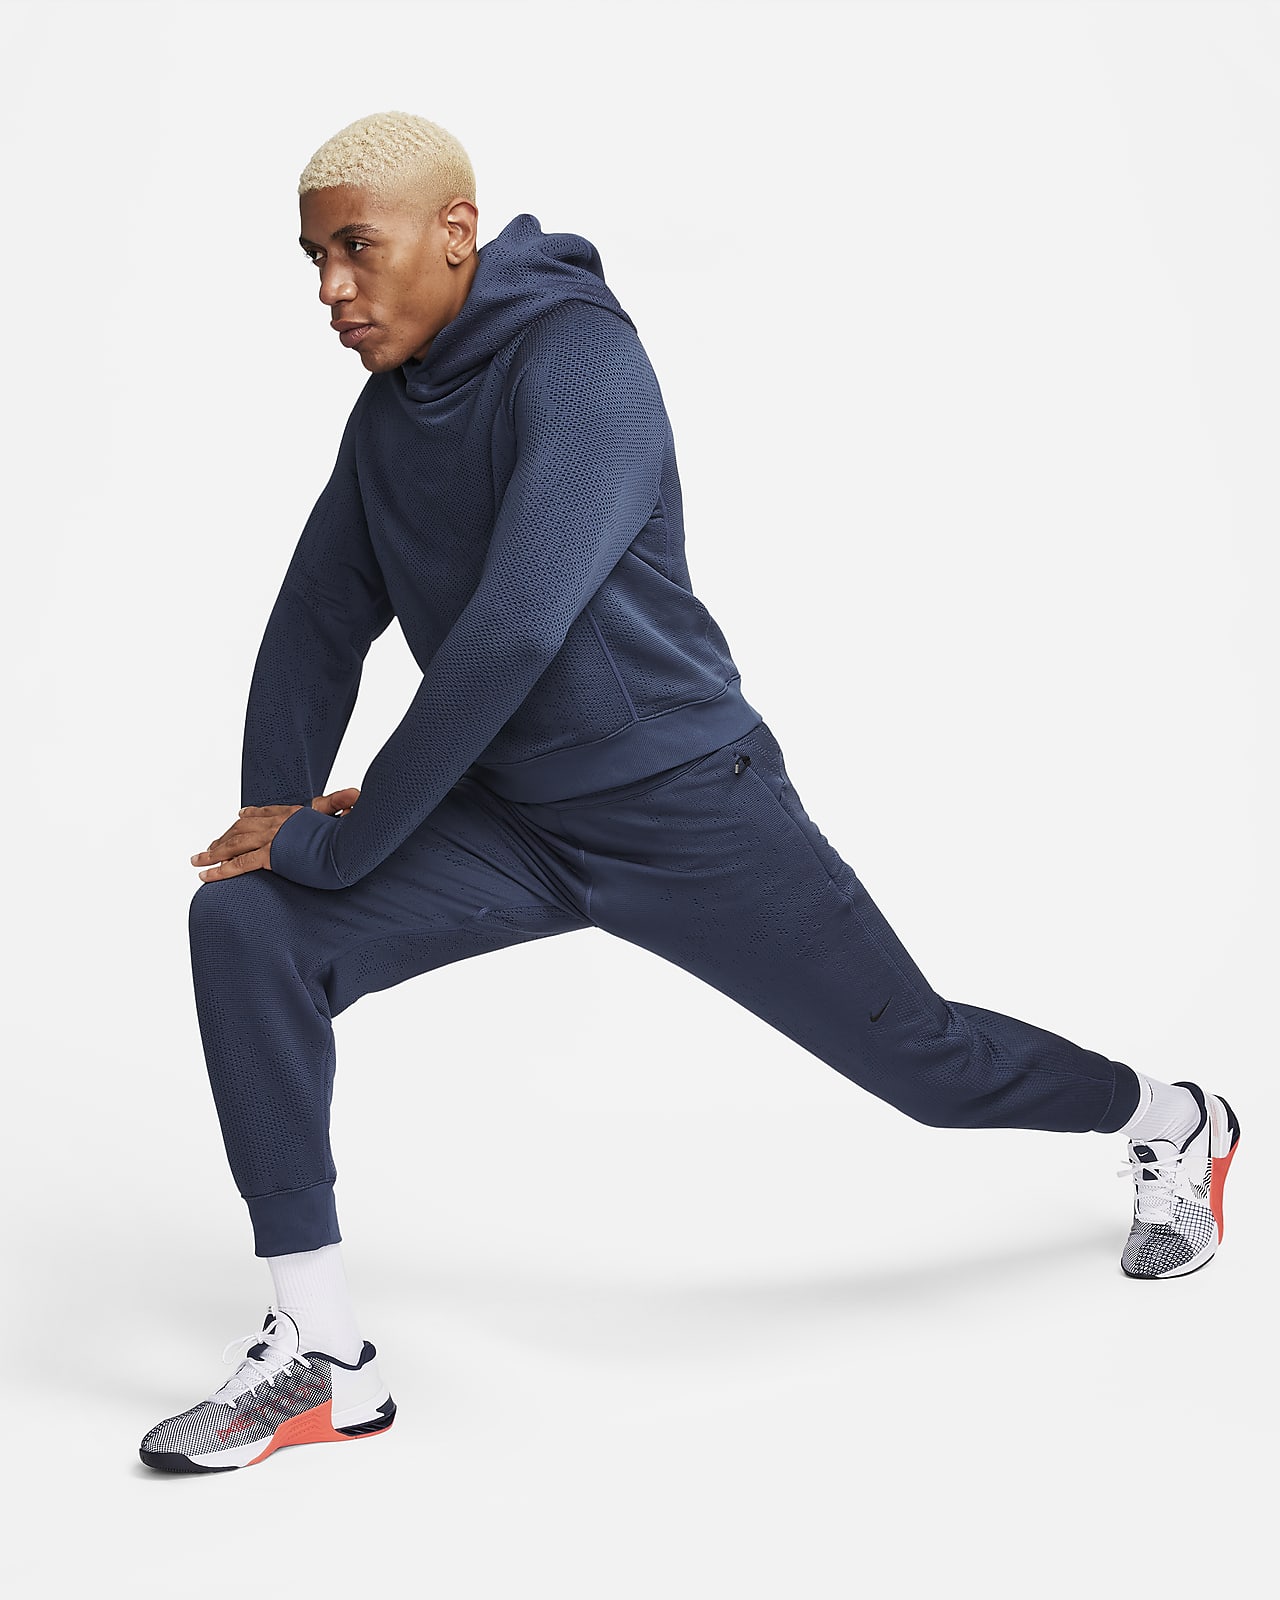 Nike Therma-FIT ADV A.P.S. Men's Hooded Versatile Top